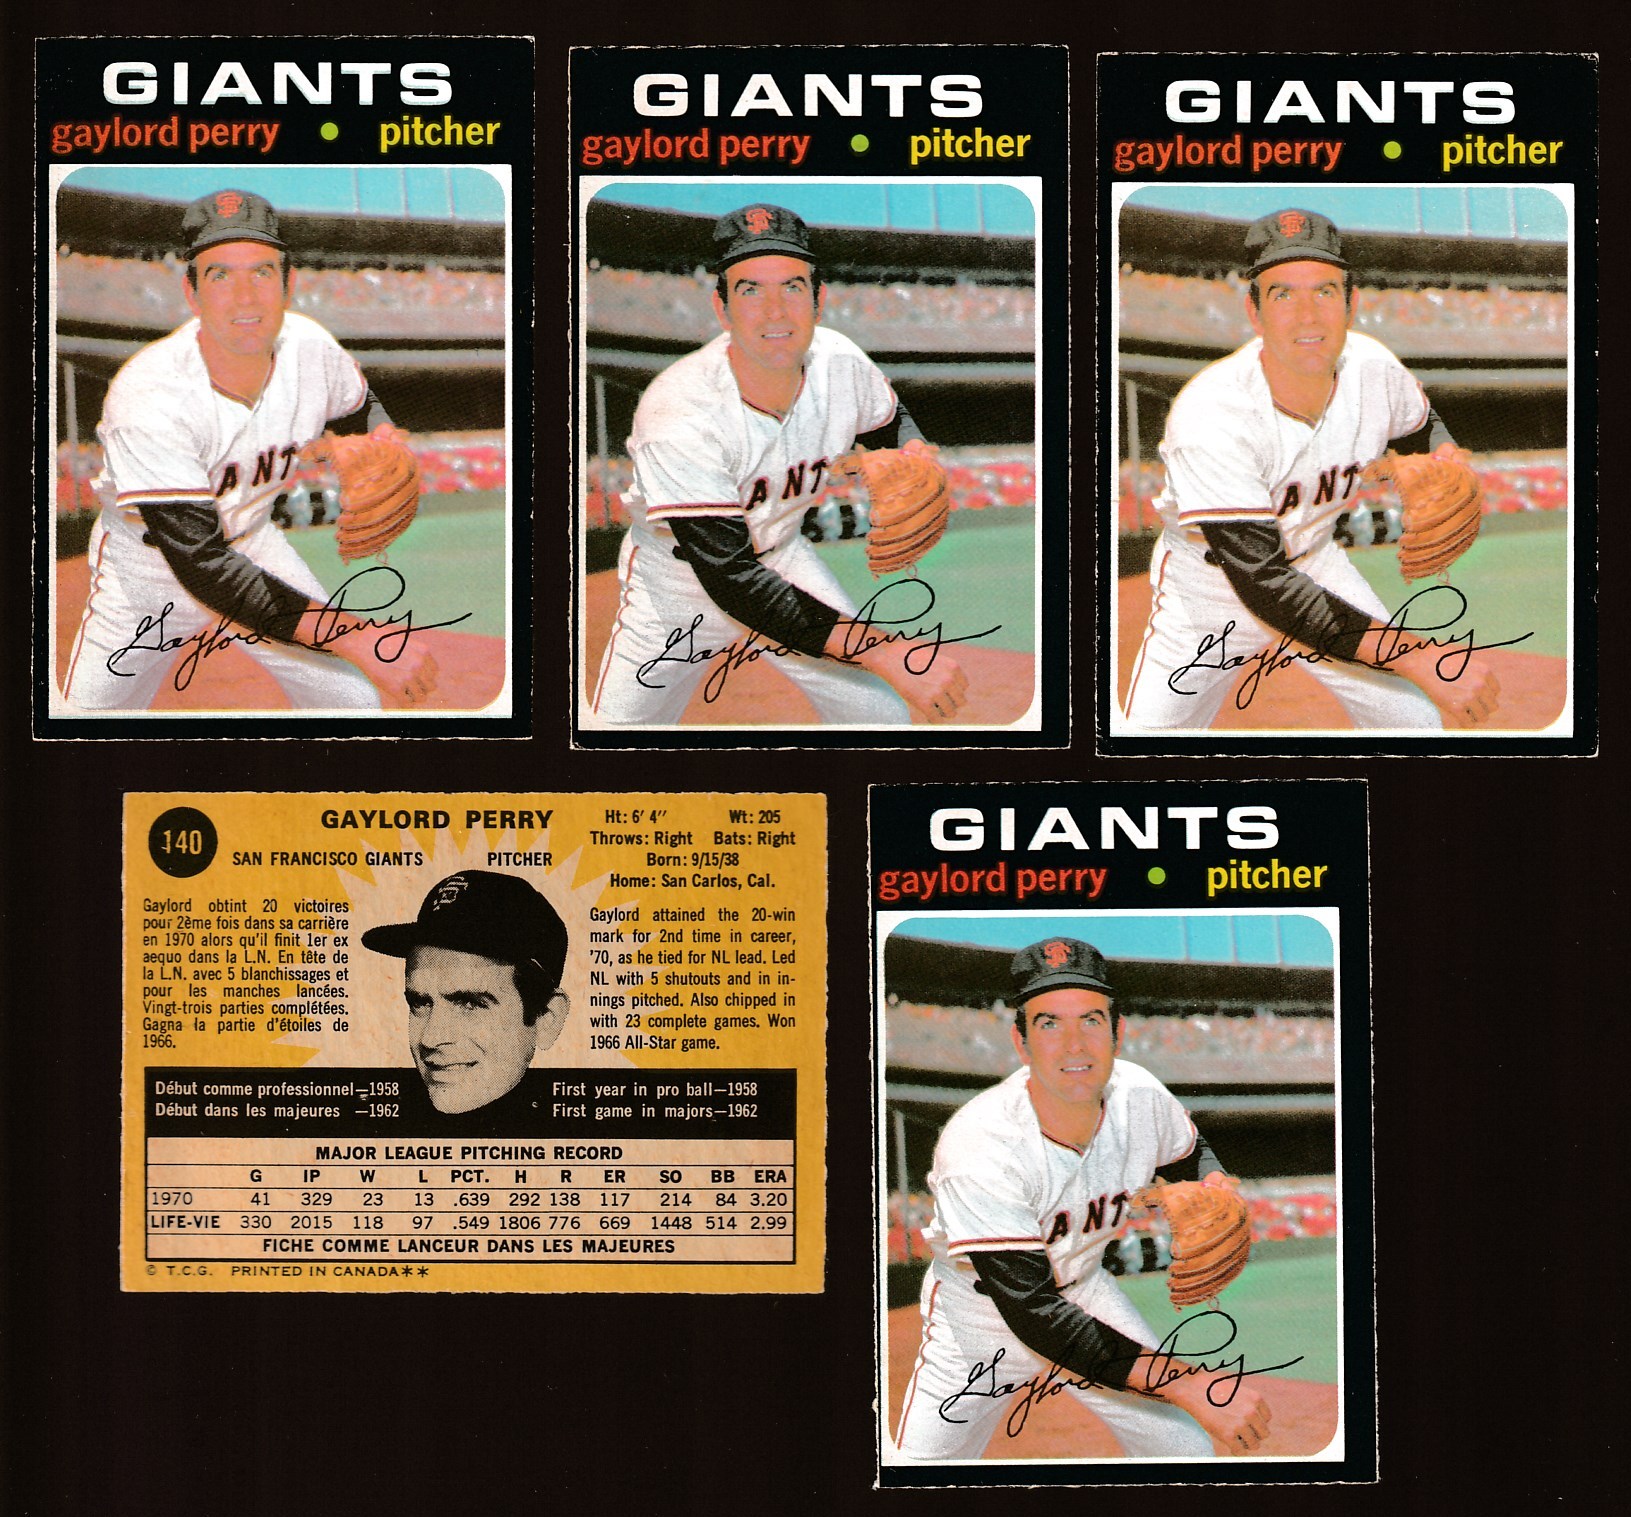 1971 O-Pee-Chee/OPC #140 Gaylord Perry (Giants) Baseball cards value